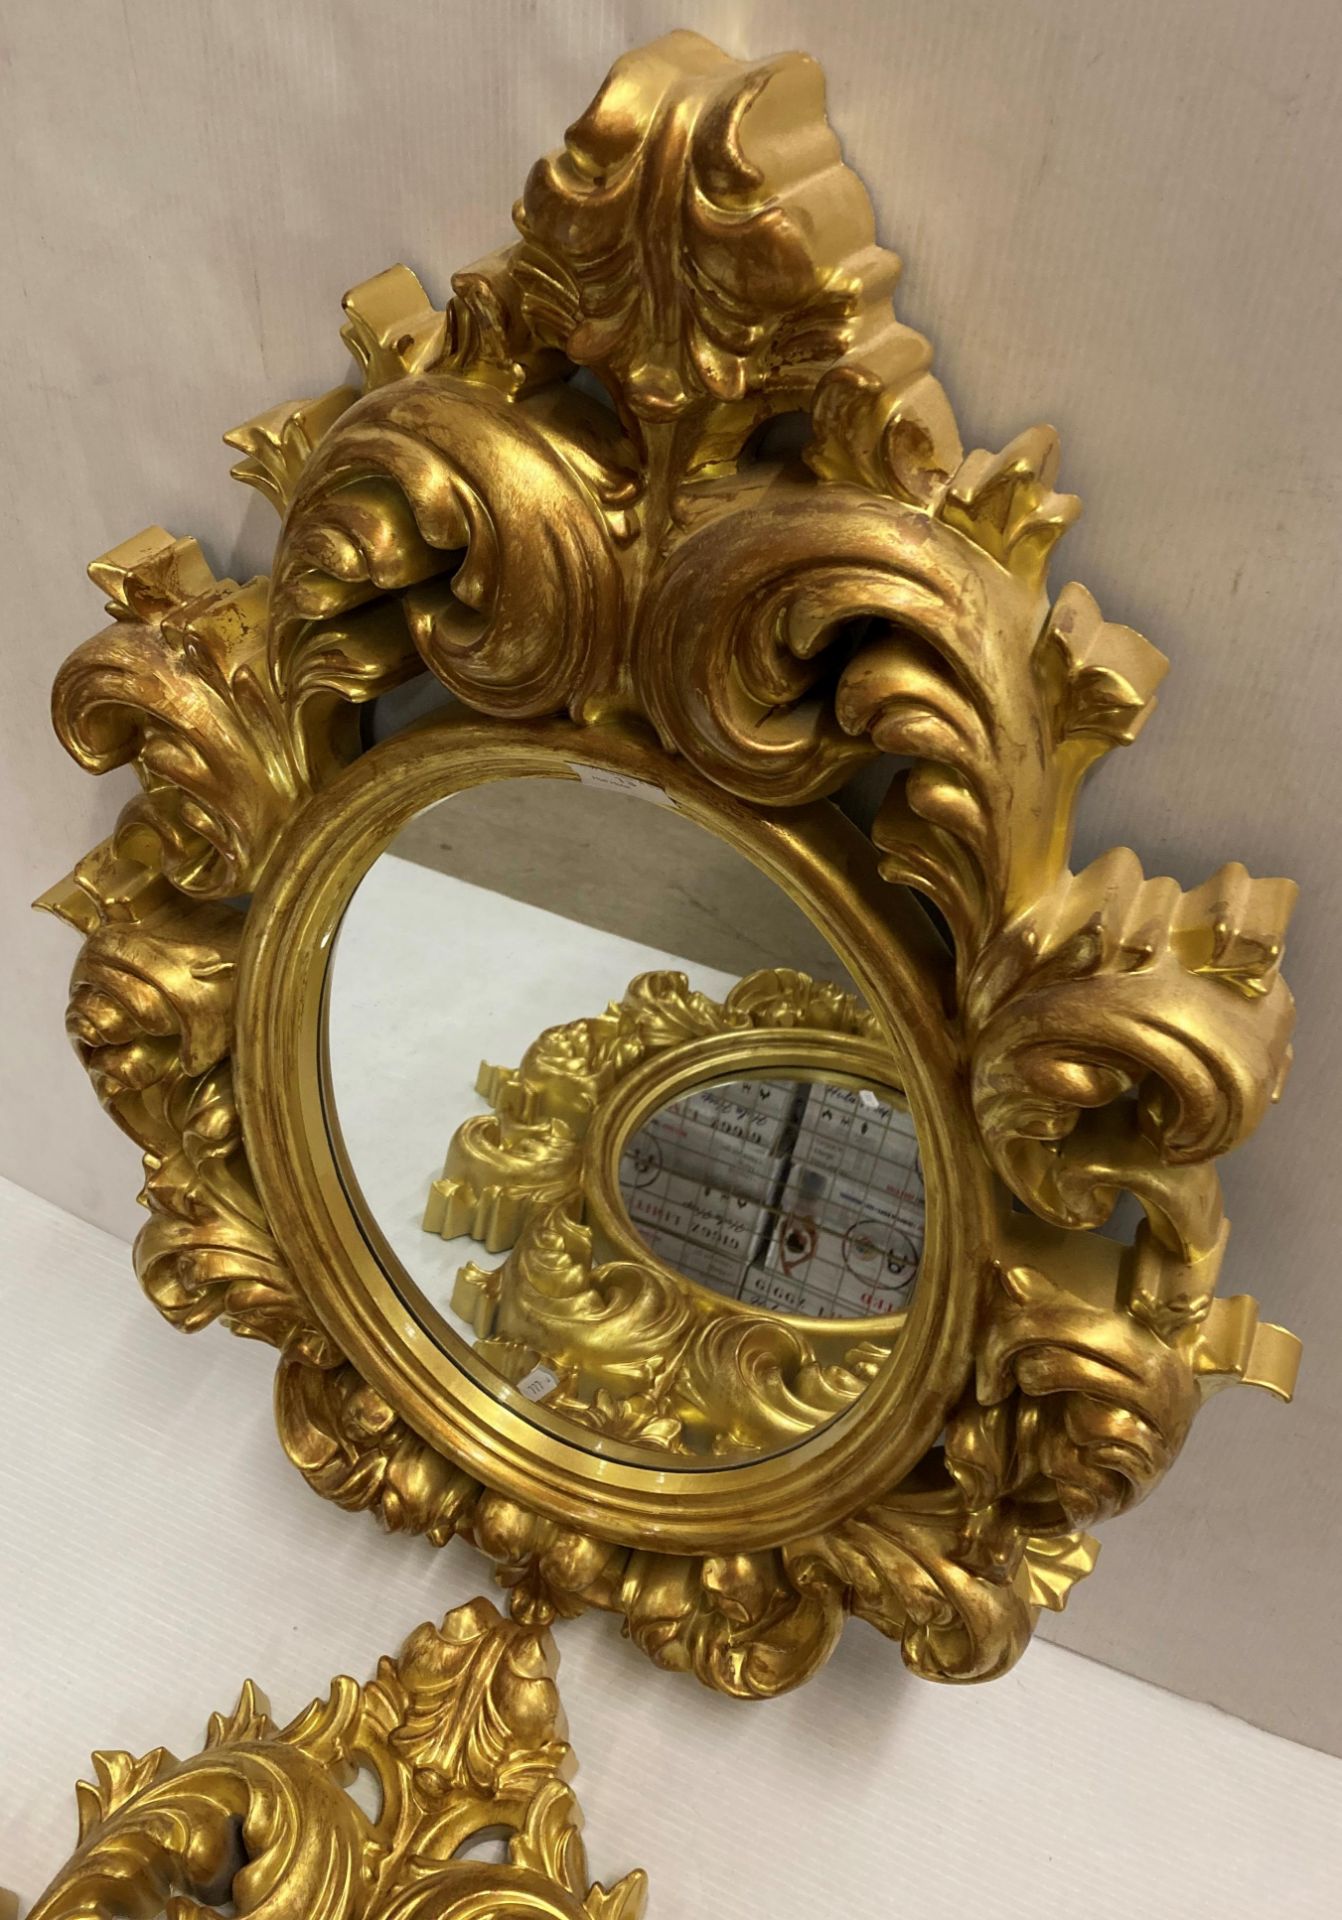 2 x Gilded plastic ornate oval wall mirrors, - Image 2 of 2